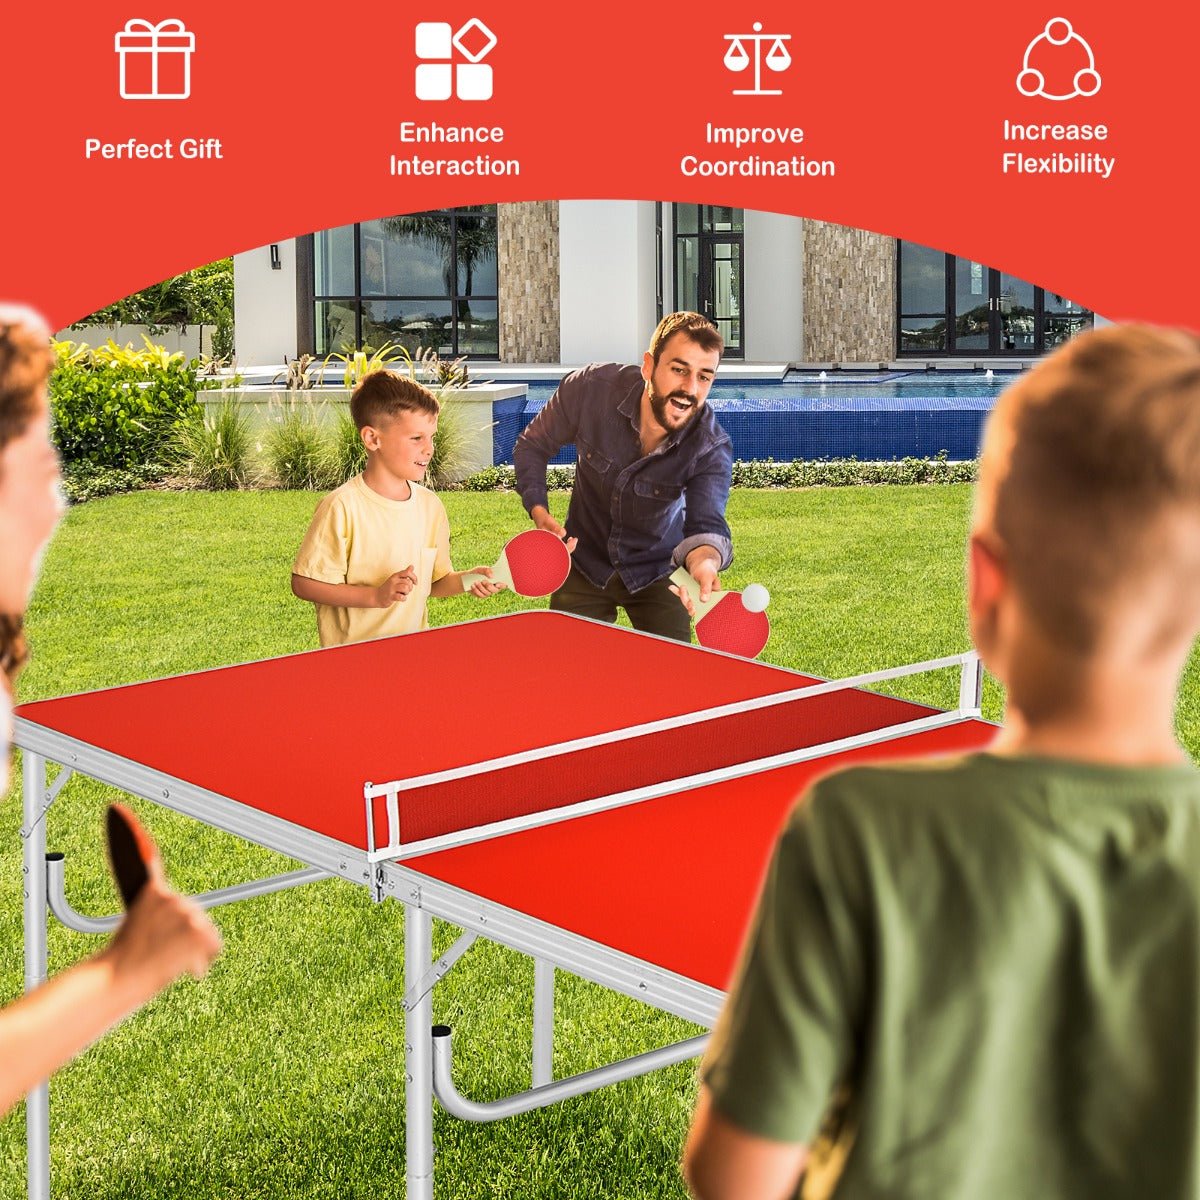 Engaging Family Time: Red Foldable Table Tennis Set with Paddles and Balls